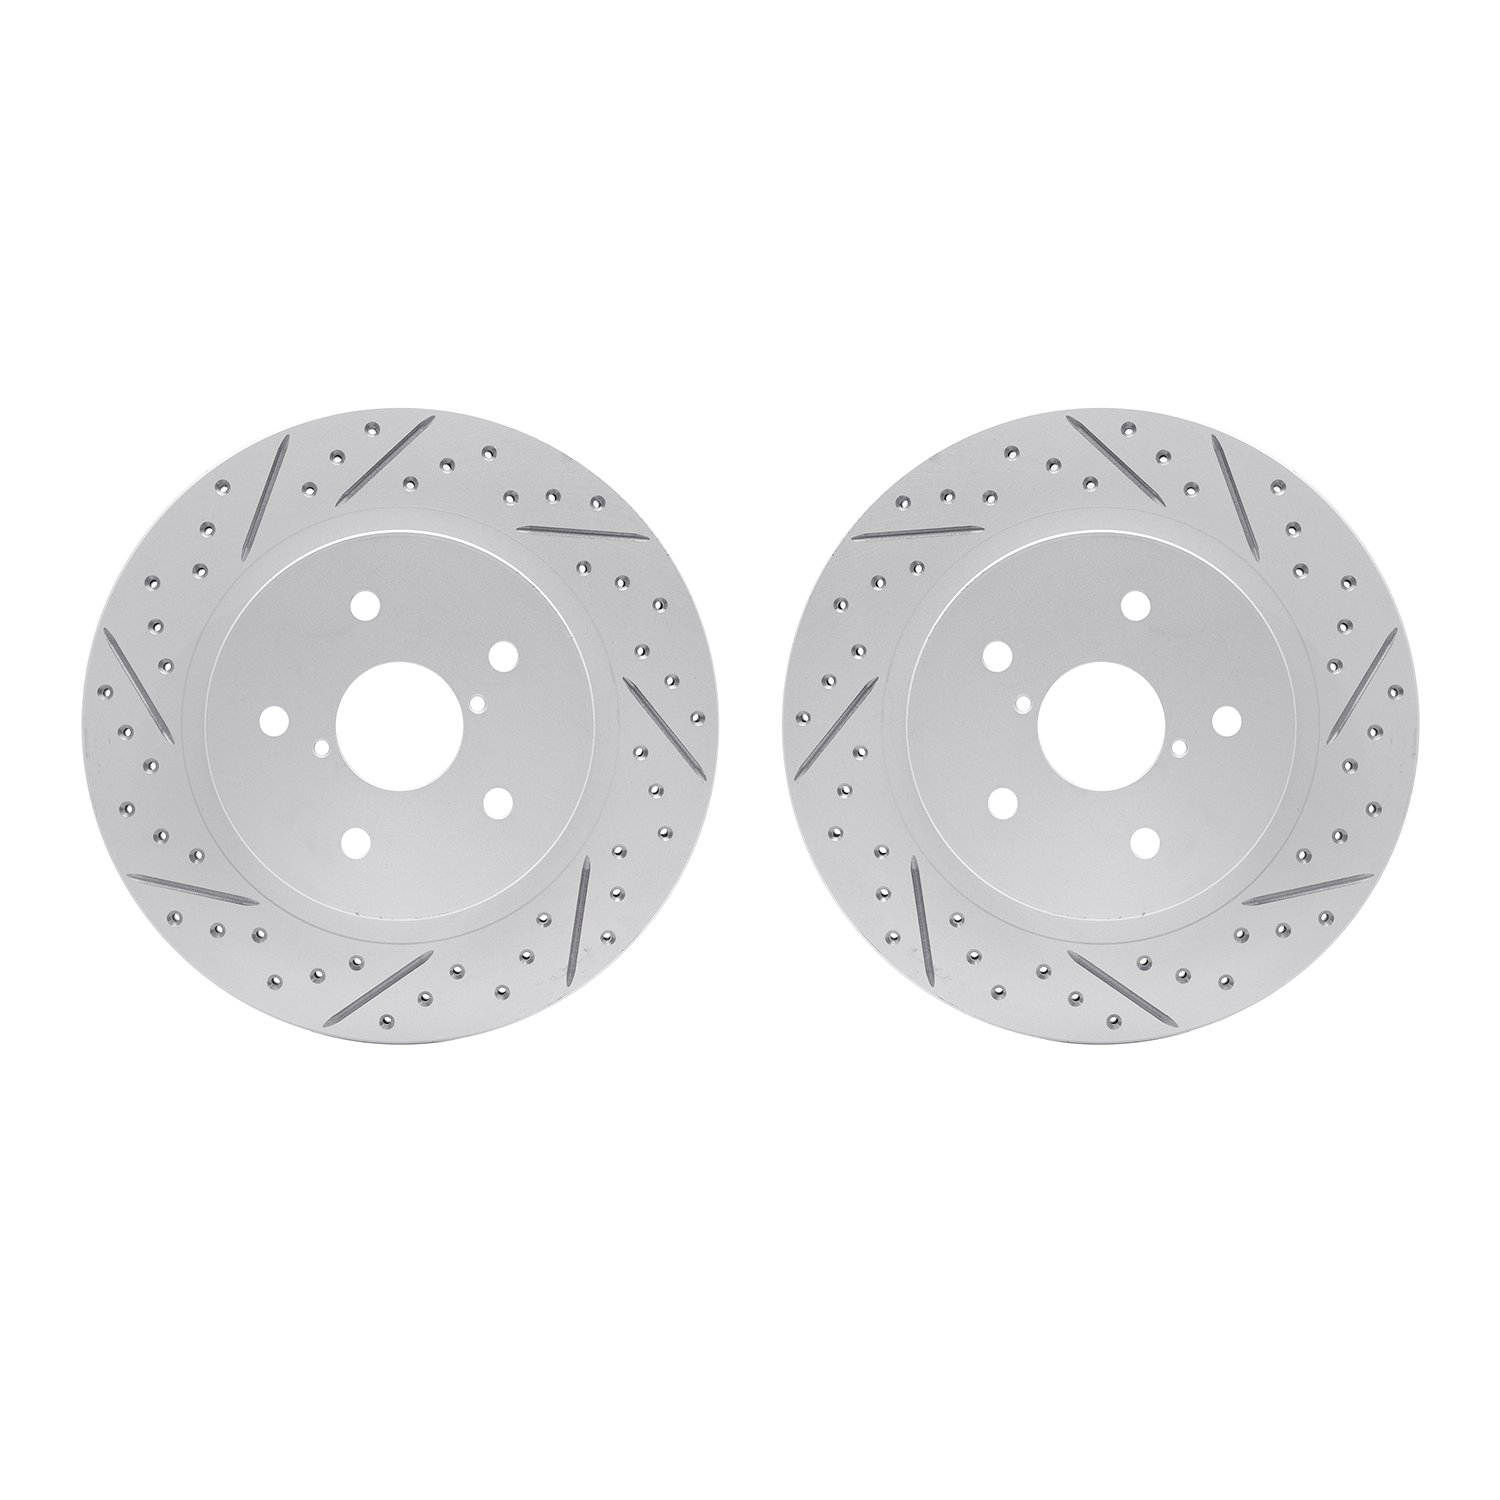 2002-13032 Geoperformance Drilled/Slotted Brake Rotors, Fits Select Subaru, Position: Rear